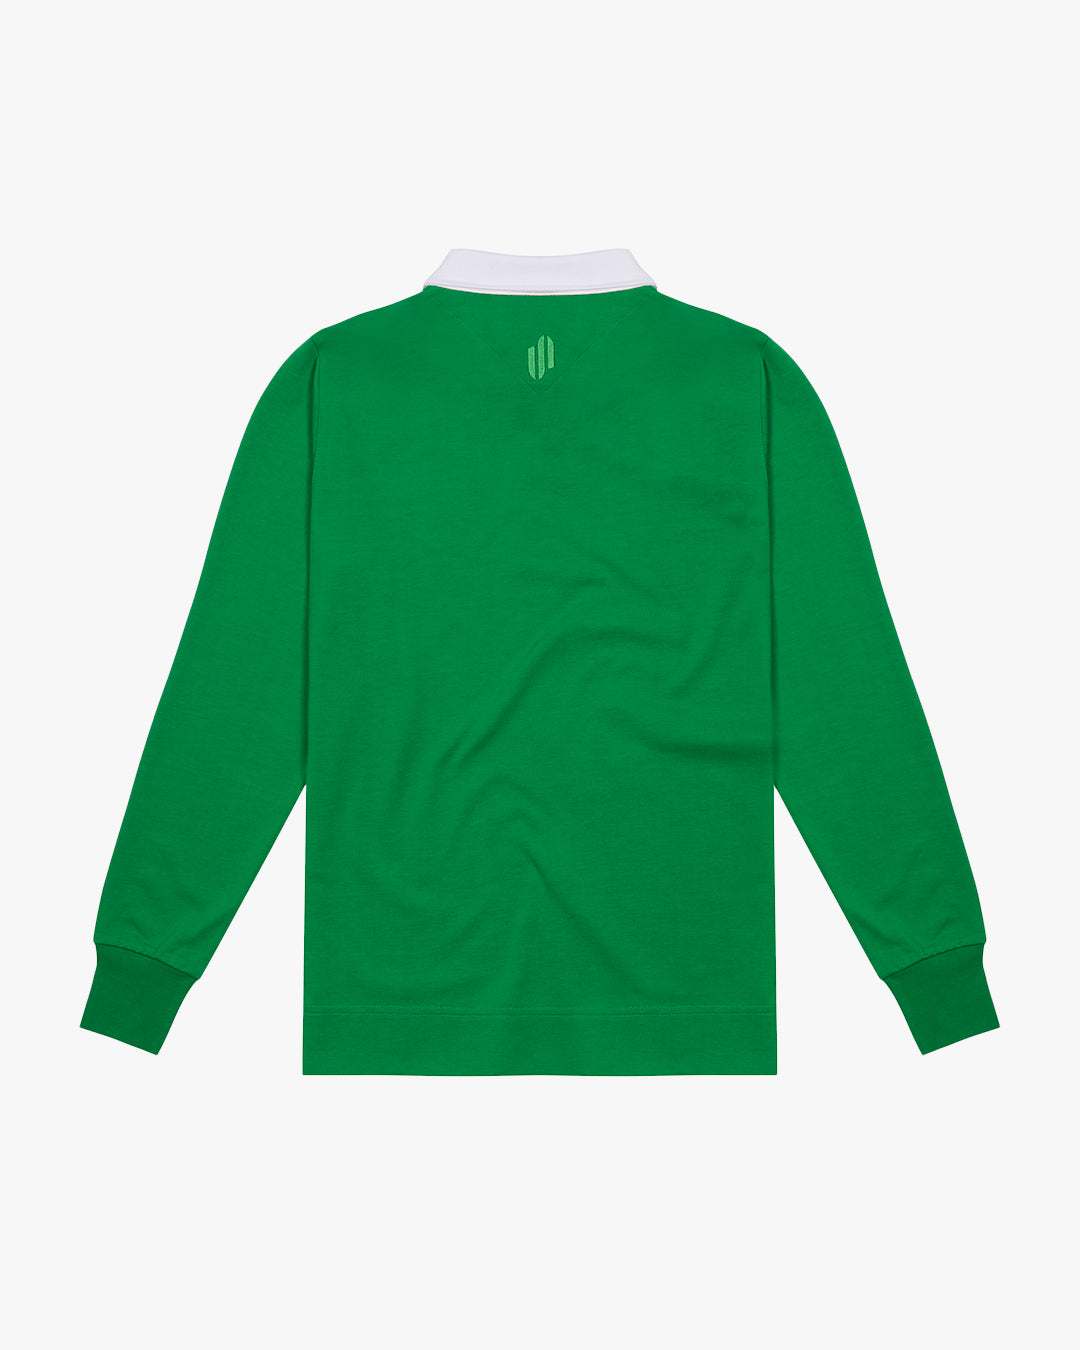 VC: IRL - Vintage Rugby Shirt - Ireland